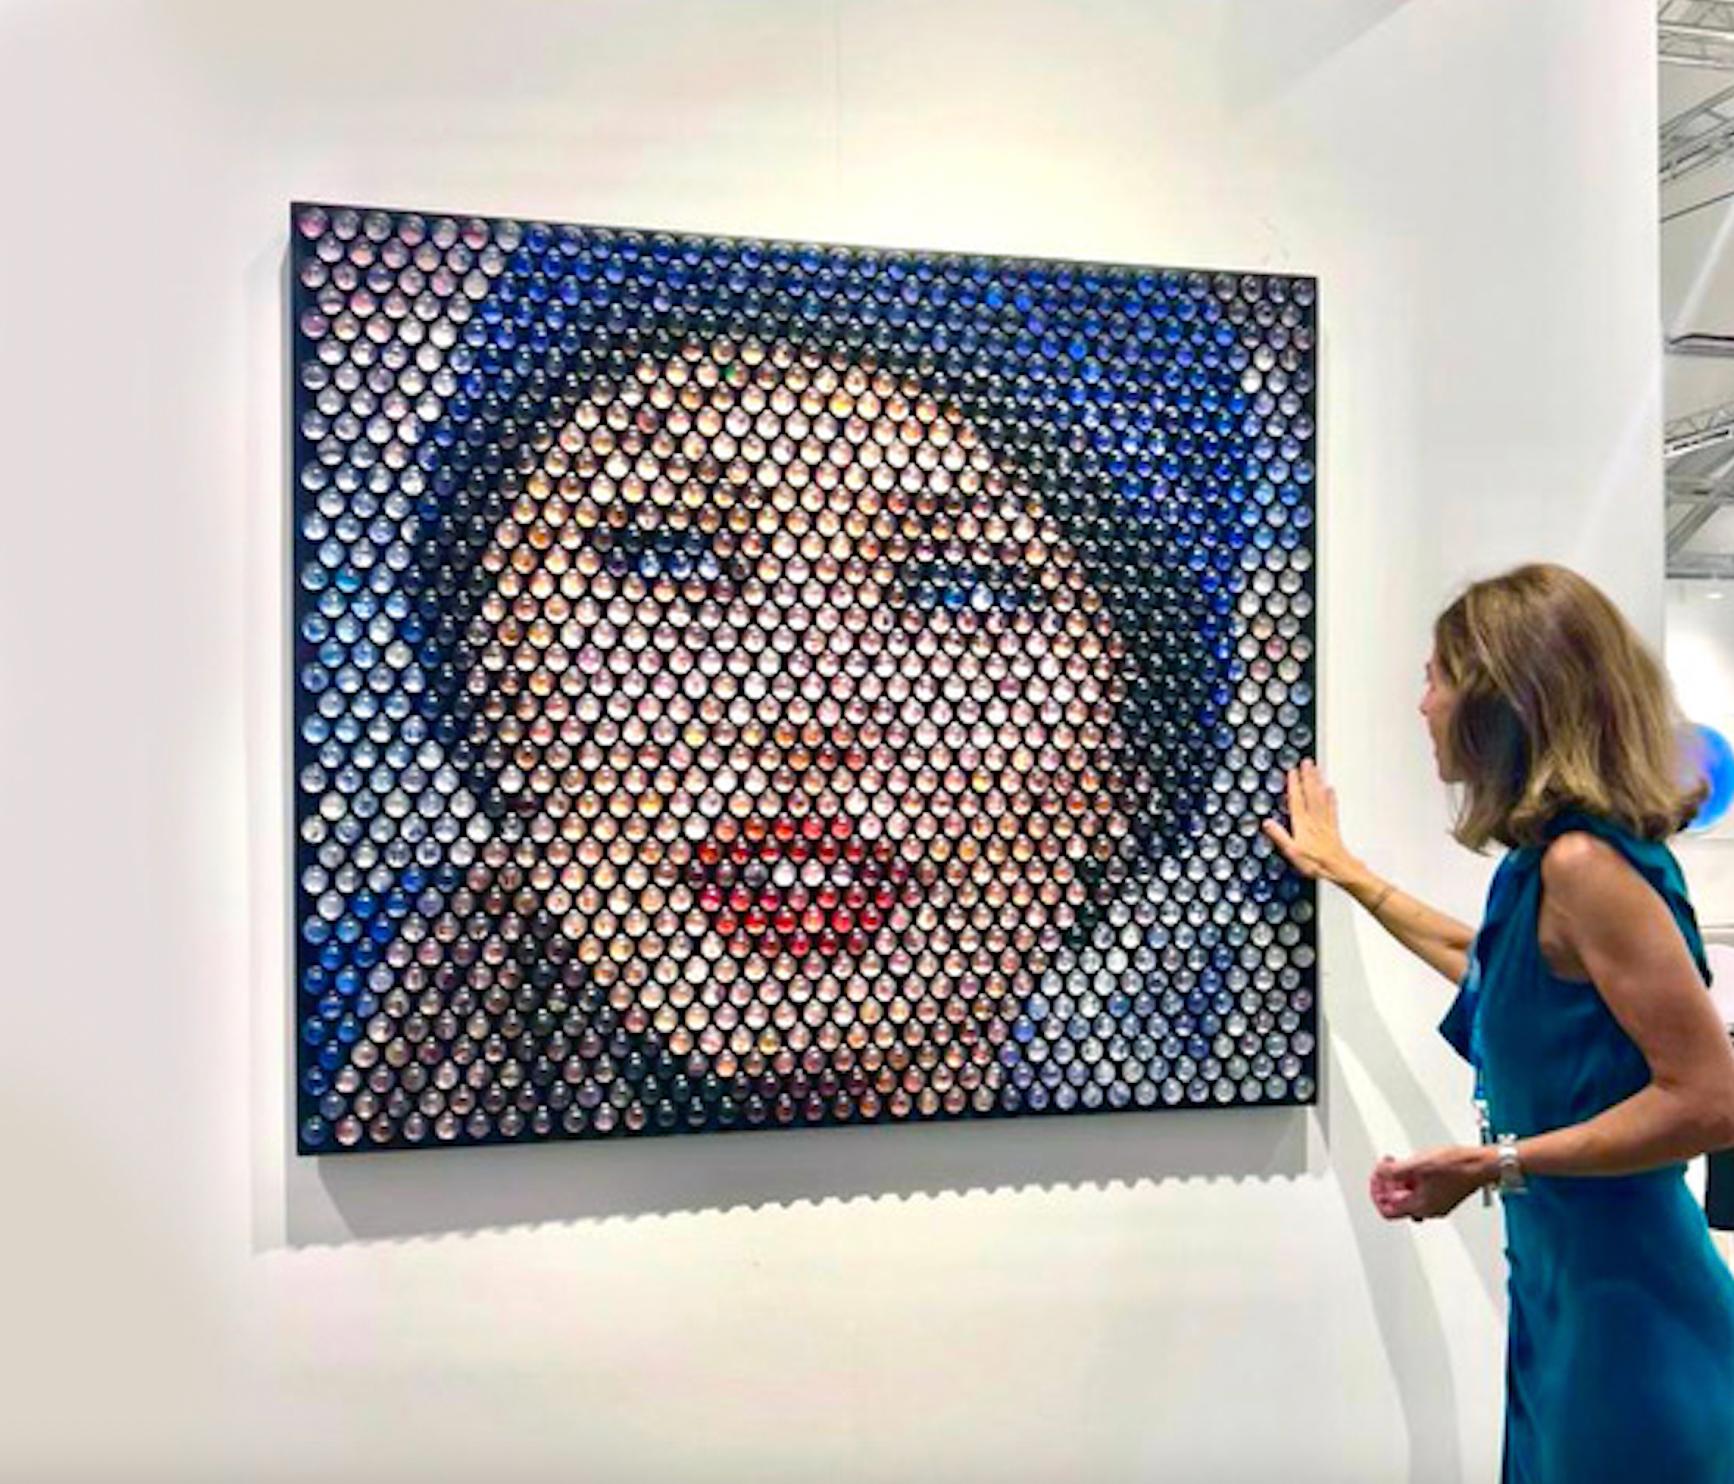 In the latest series, inspired by media, pop culture, and film Jantzen takes Neo-pointillism to the next level utilizing thousands collection of photography, cinematographic stills, and other collected material encapsulated in glass spheres; hiding